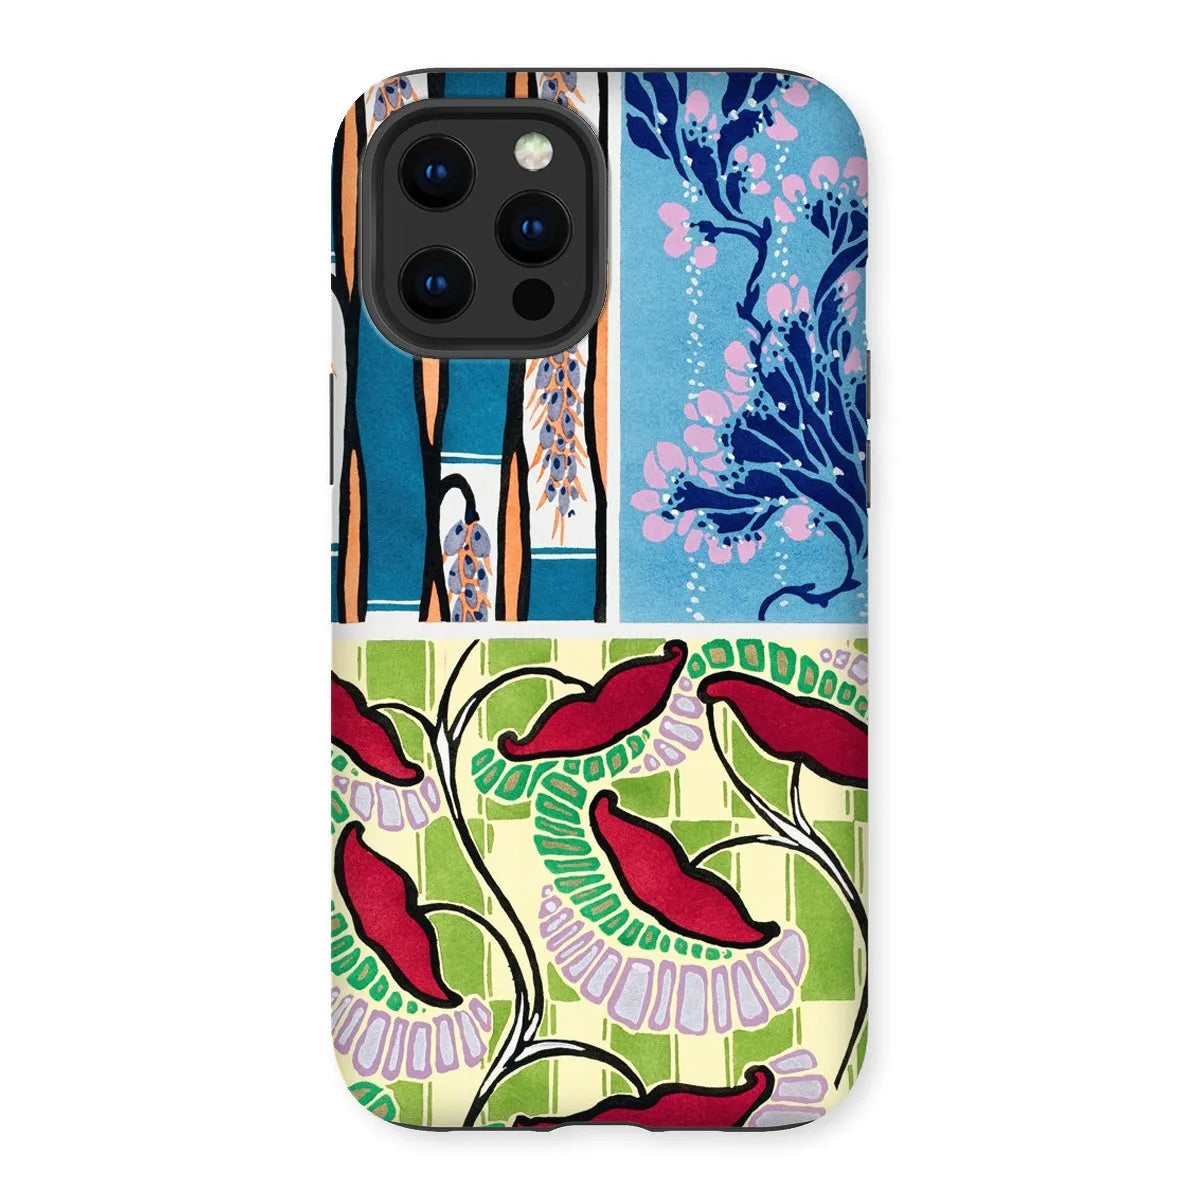 Floral Kitsch Aesthetic Art Phone Case - E.a. Séguy - Iphone 12 Pro Max / Matte - Mobile Phone Cases - Aesthetic Art